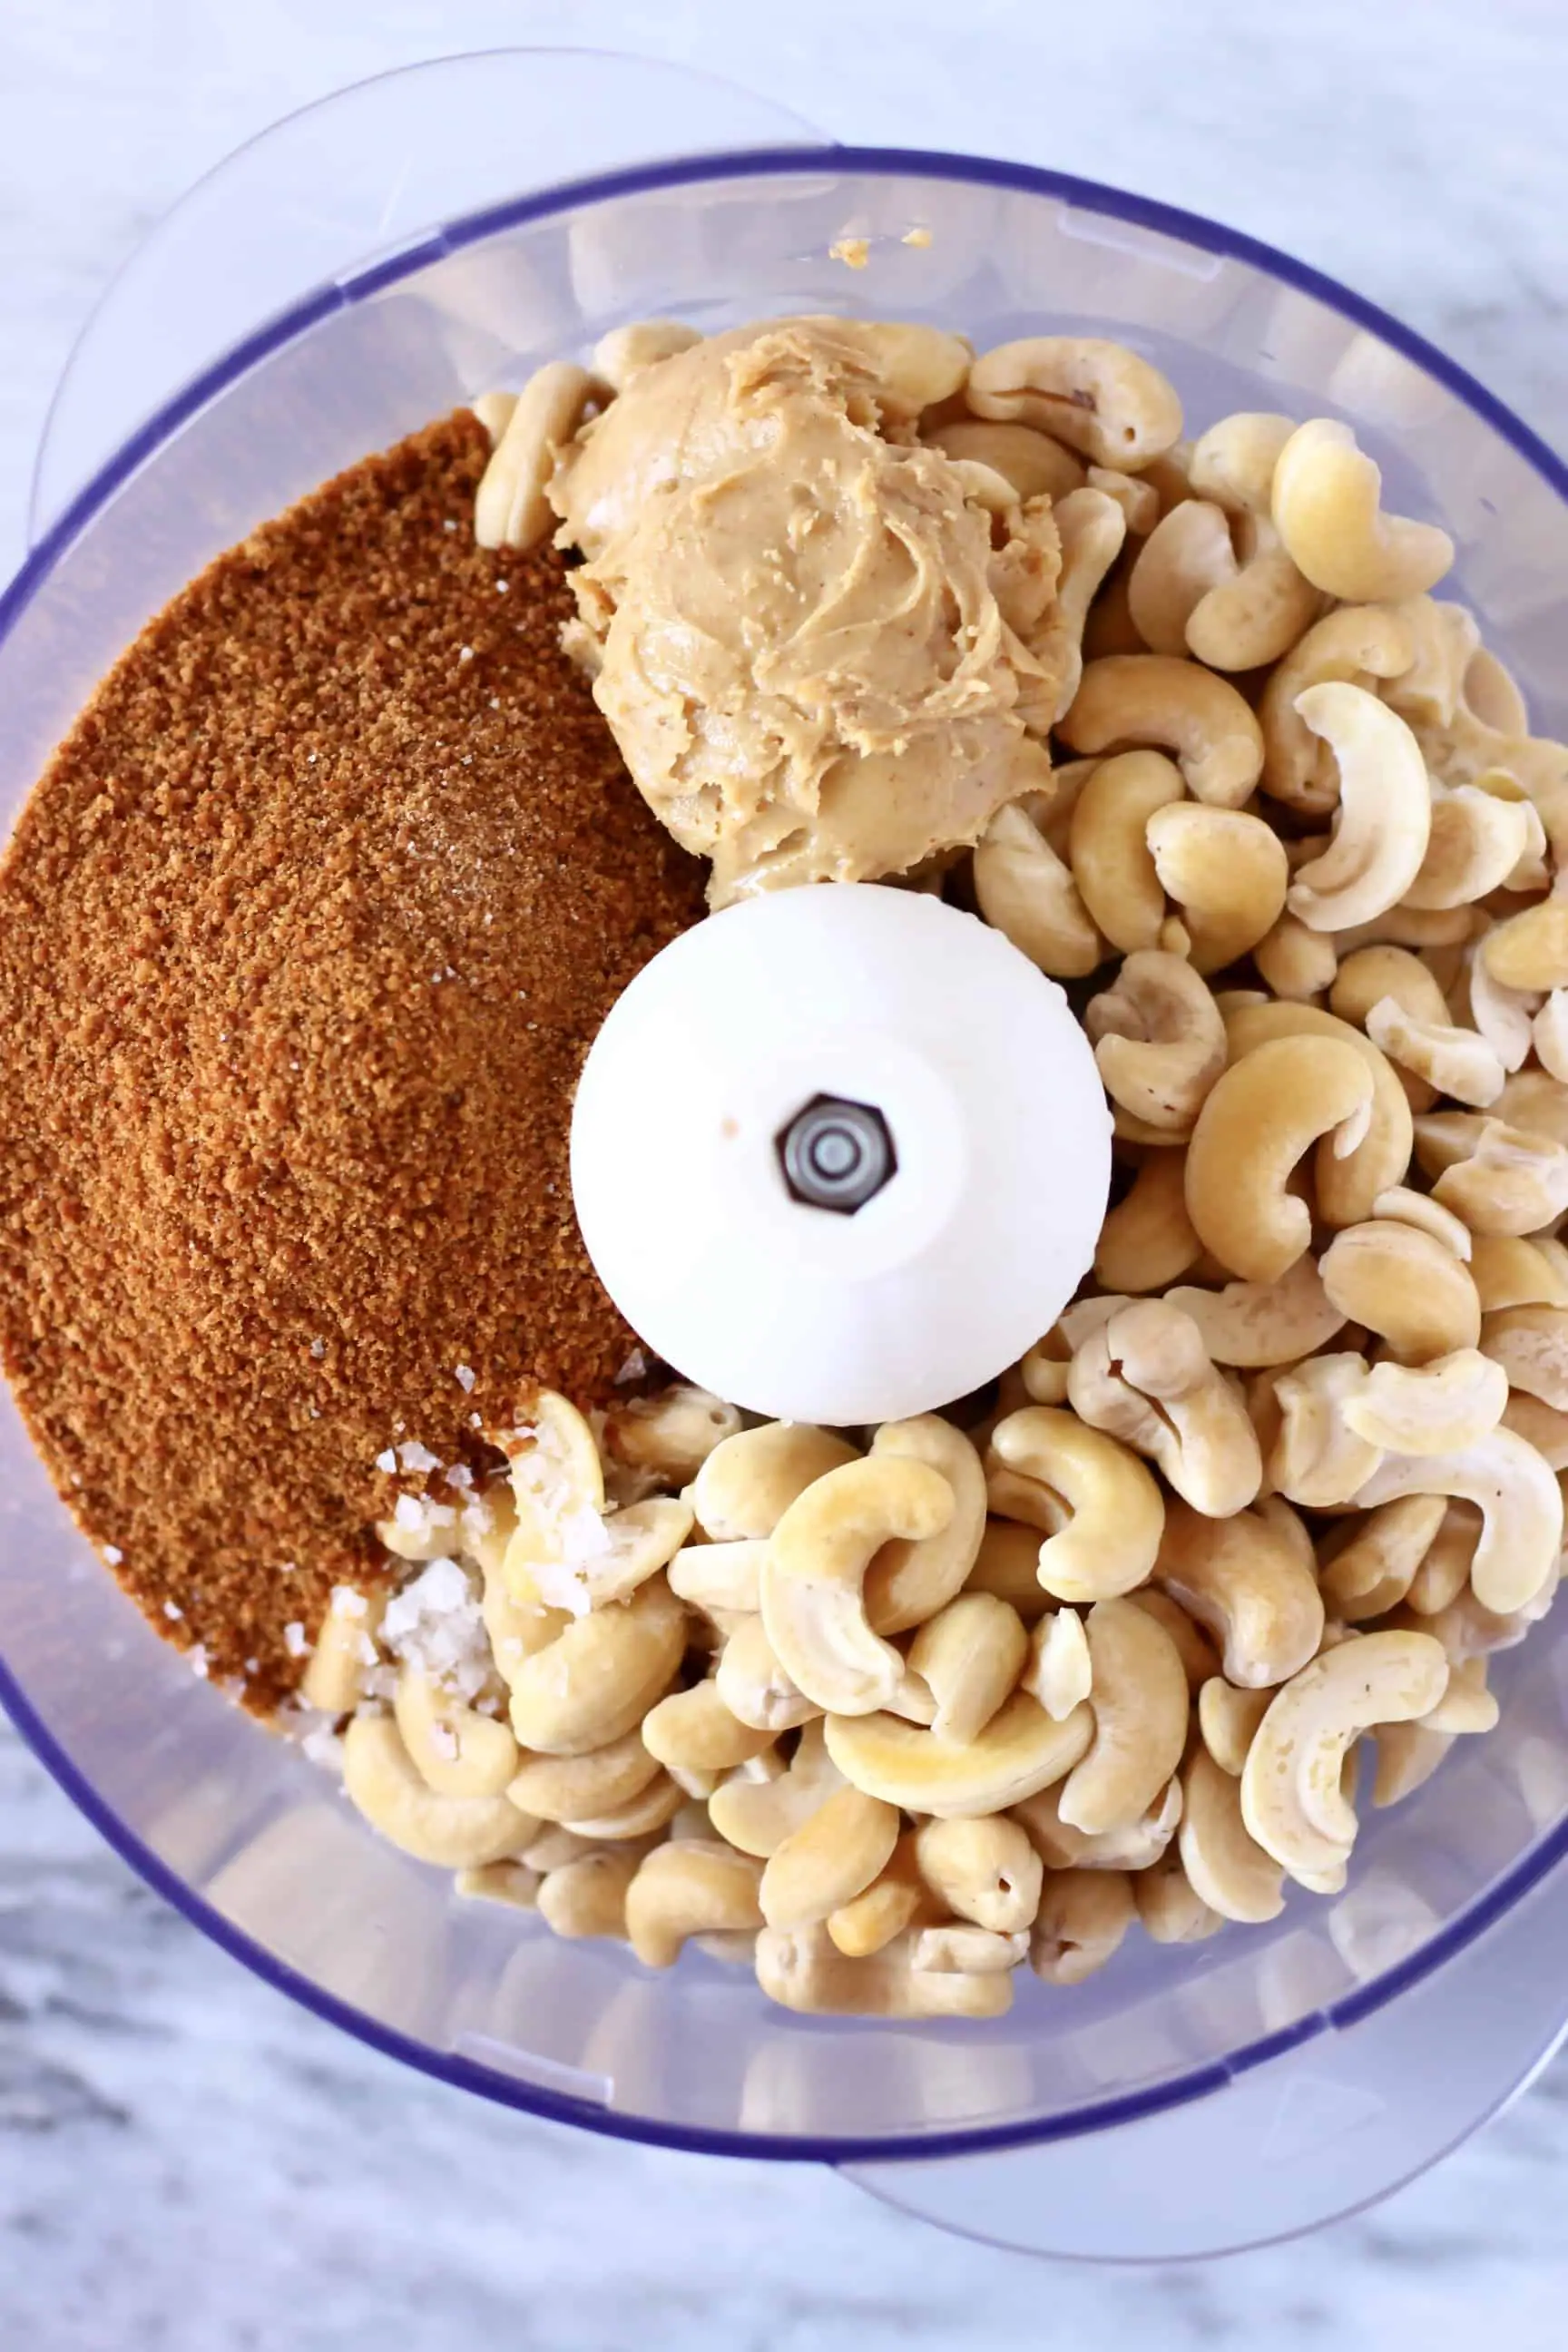 Cashew nuts, peanut butter and coconut sugar in a food processor